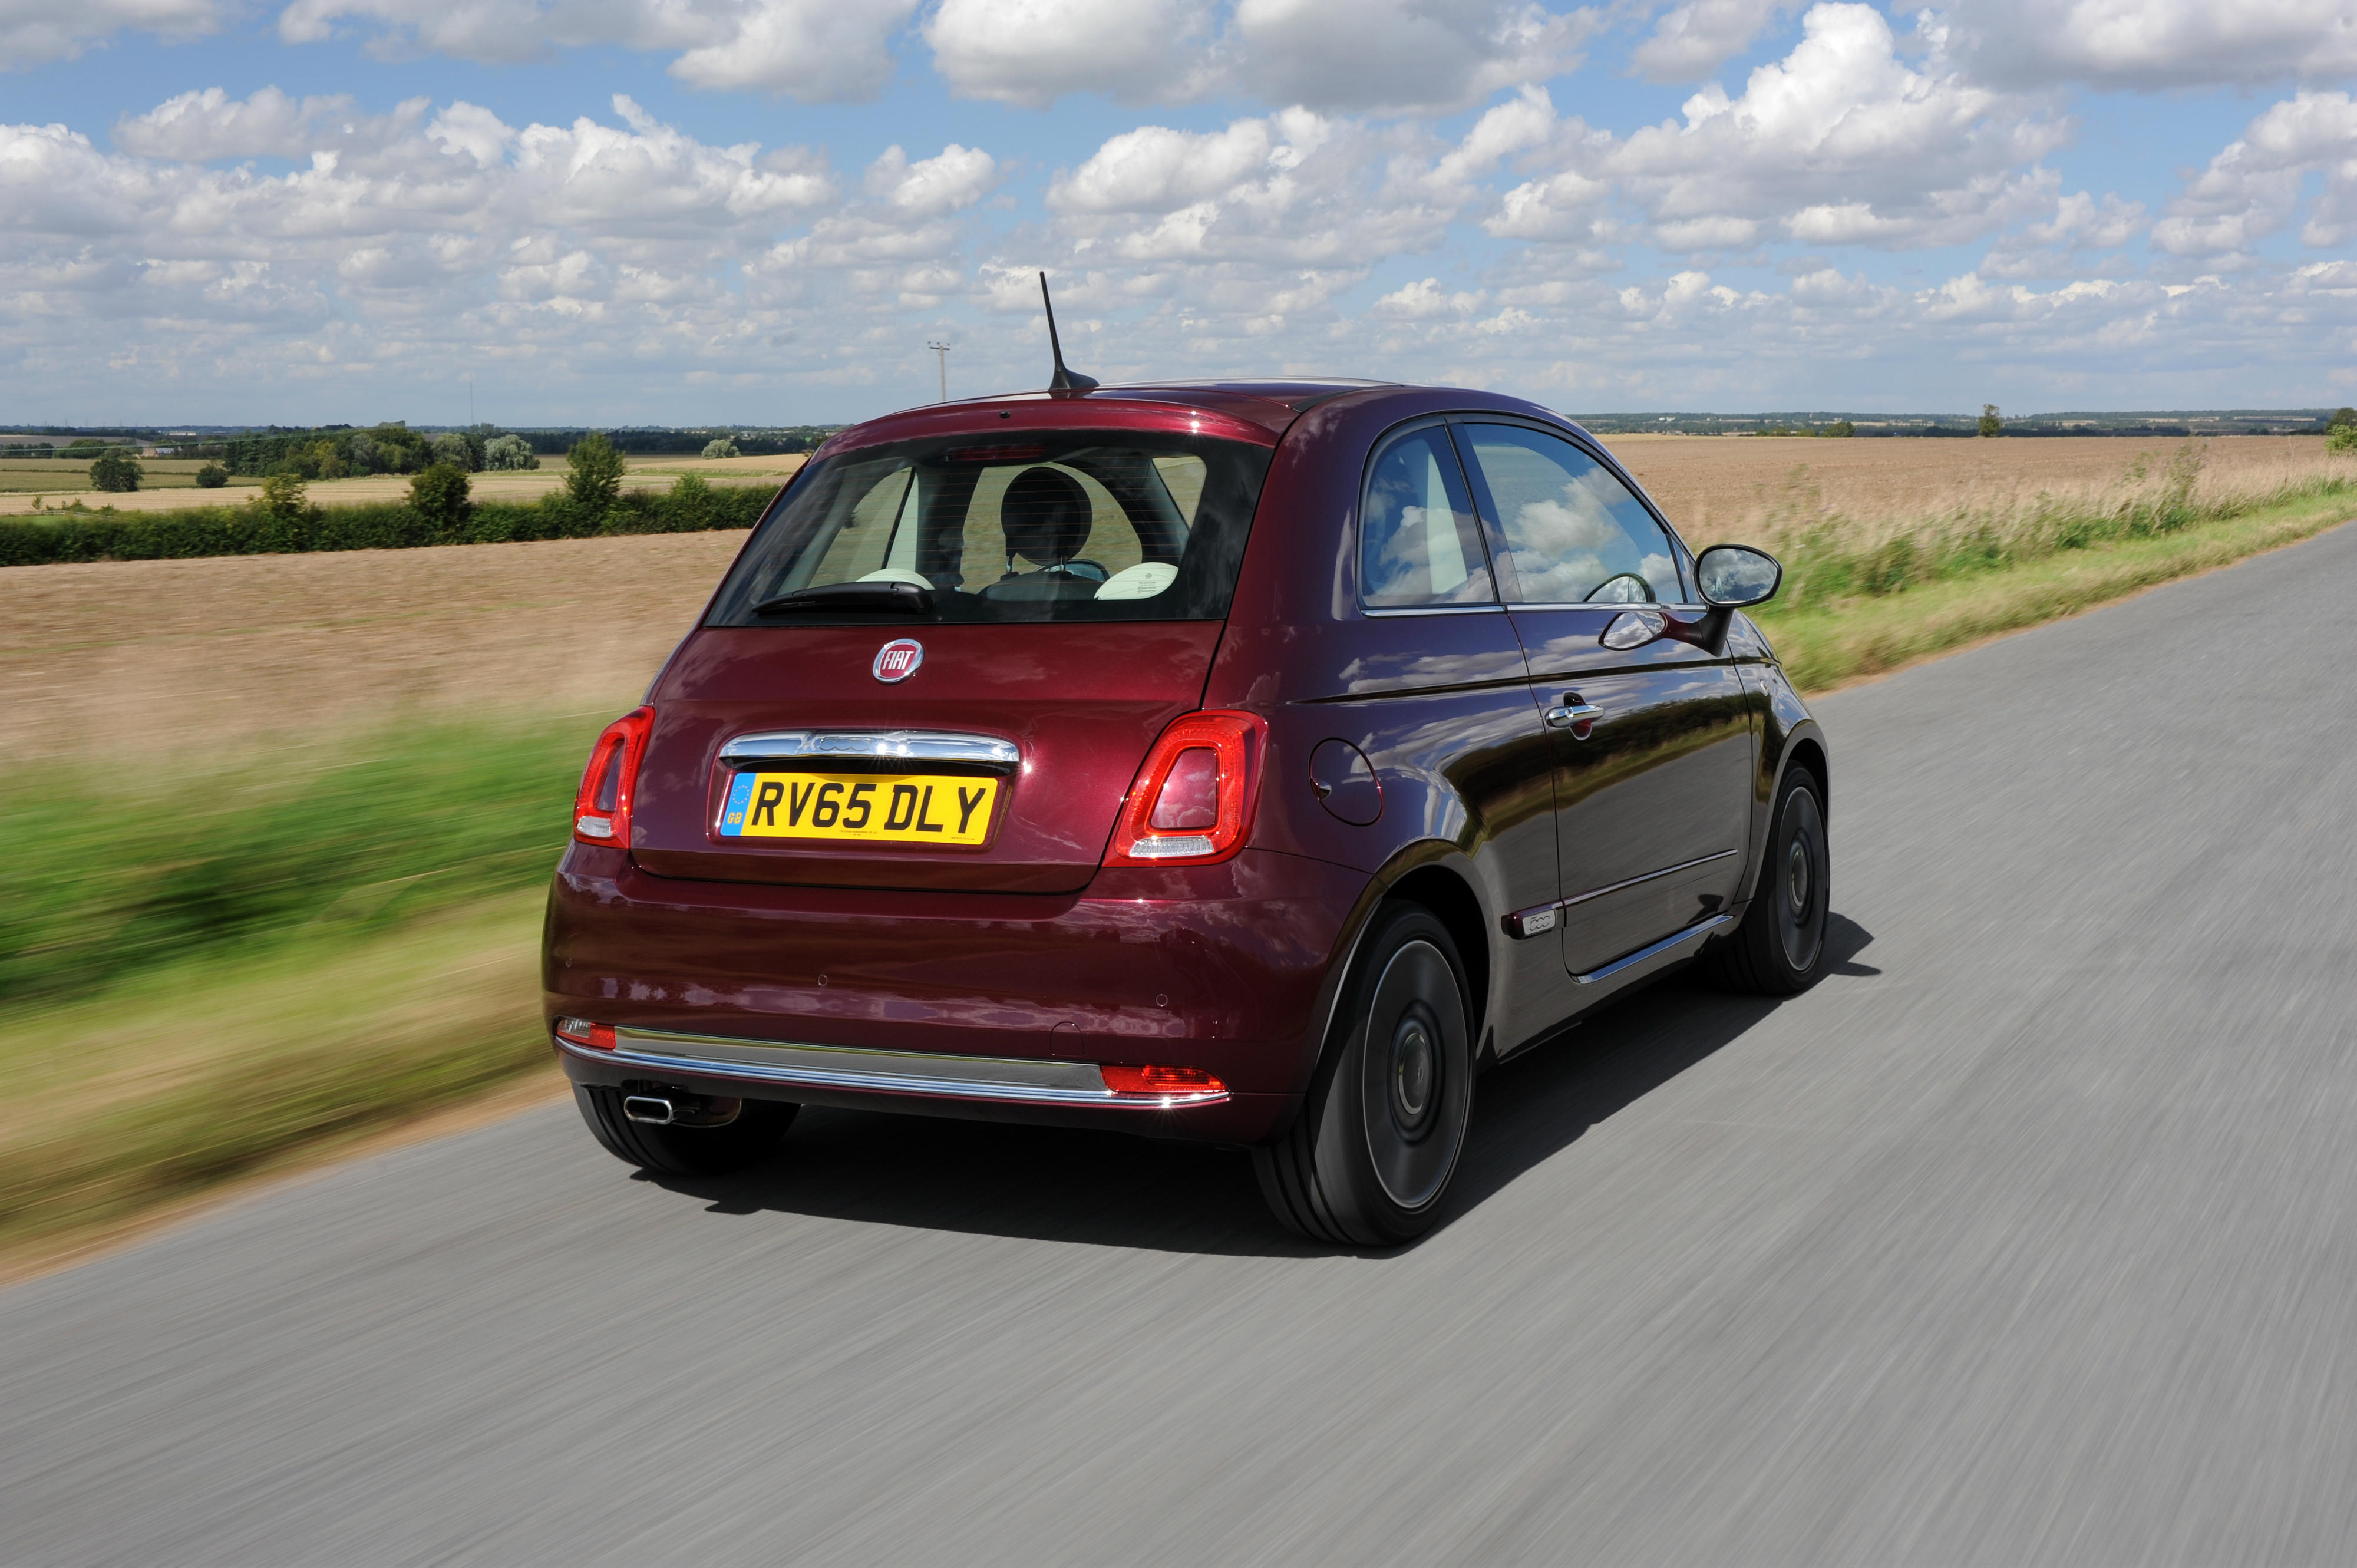 Review of the 2015 Fiat 500 TwinAir